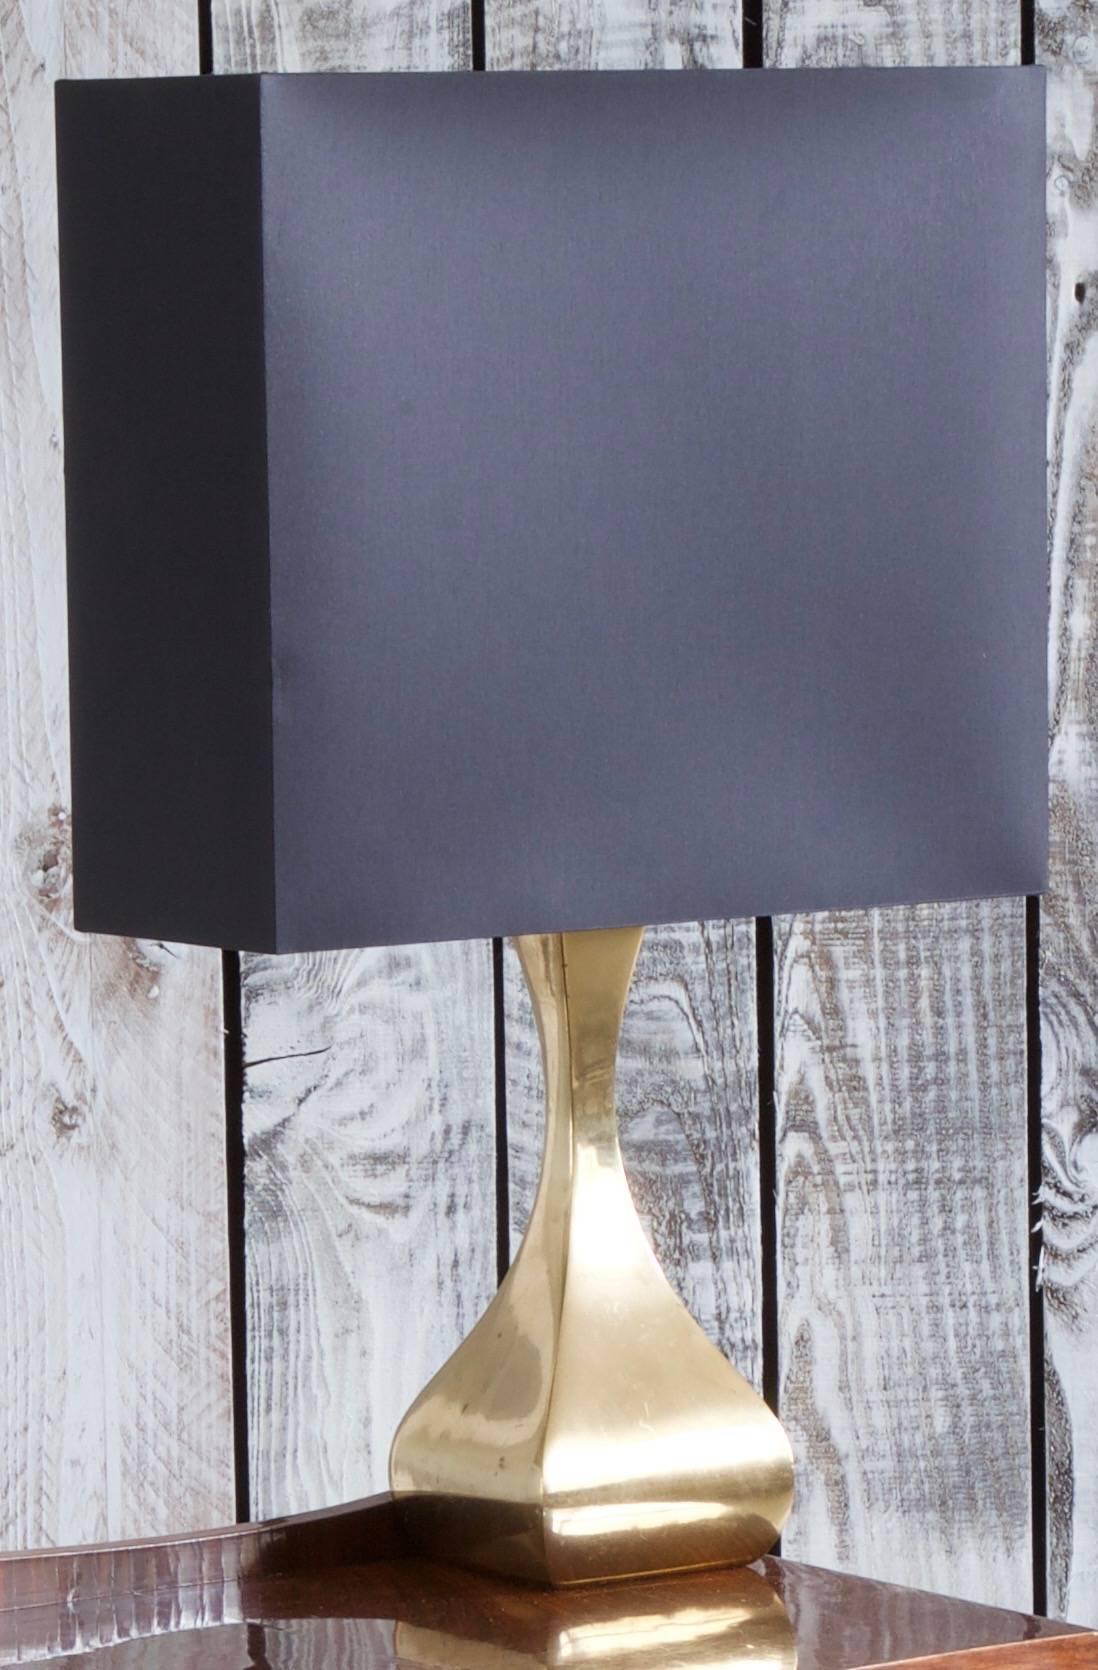 Midcentury table light with an elegantly curved solid brass base which contrasts with a strong black, block shaped lampshade which has a slim side depth to further emphasize the overall play in proportions. The inside of the shade has a gold foil